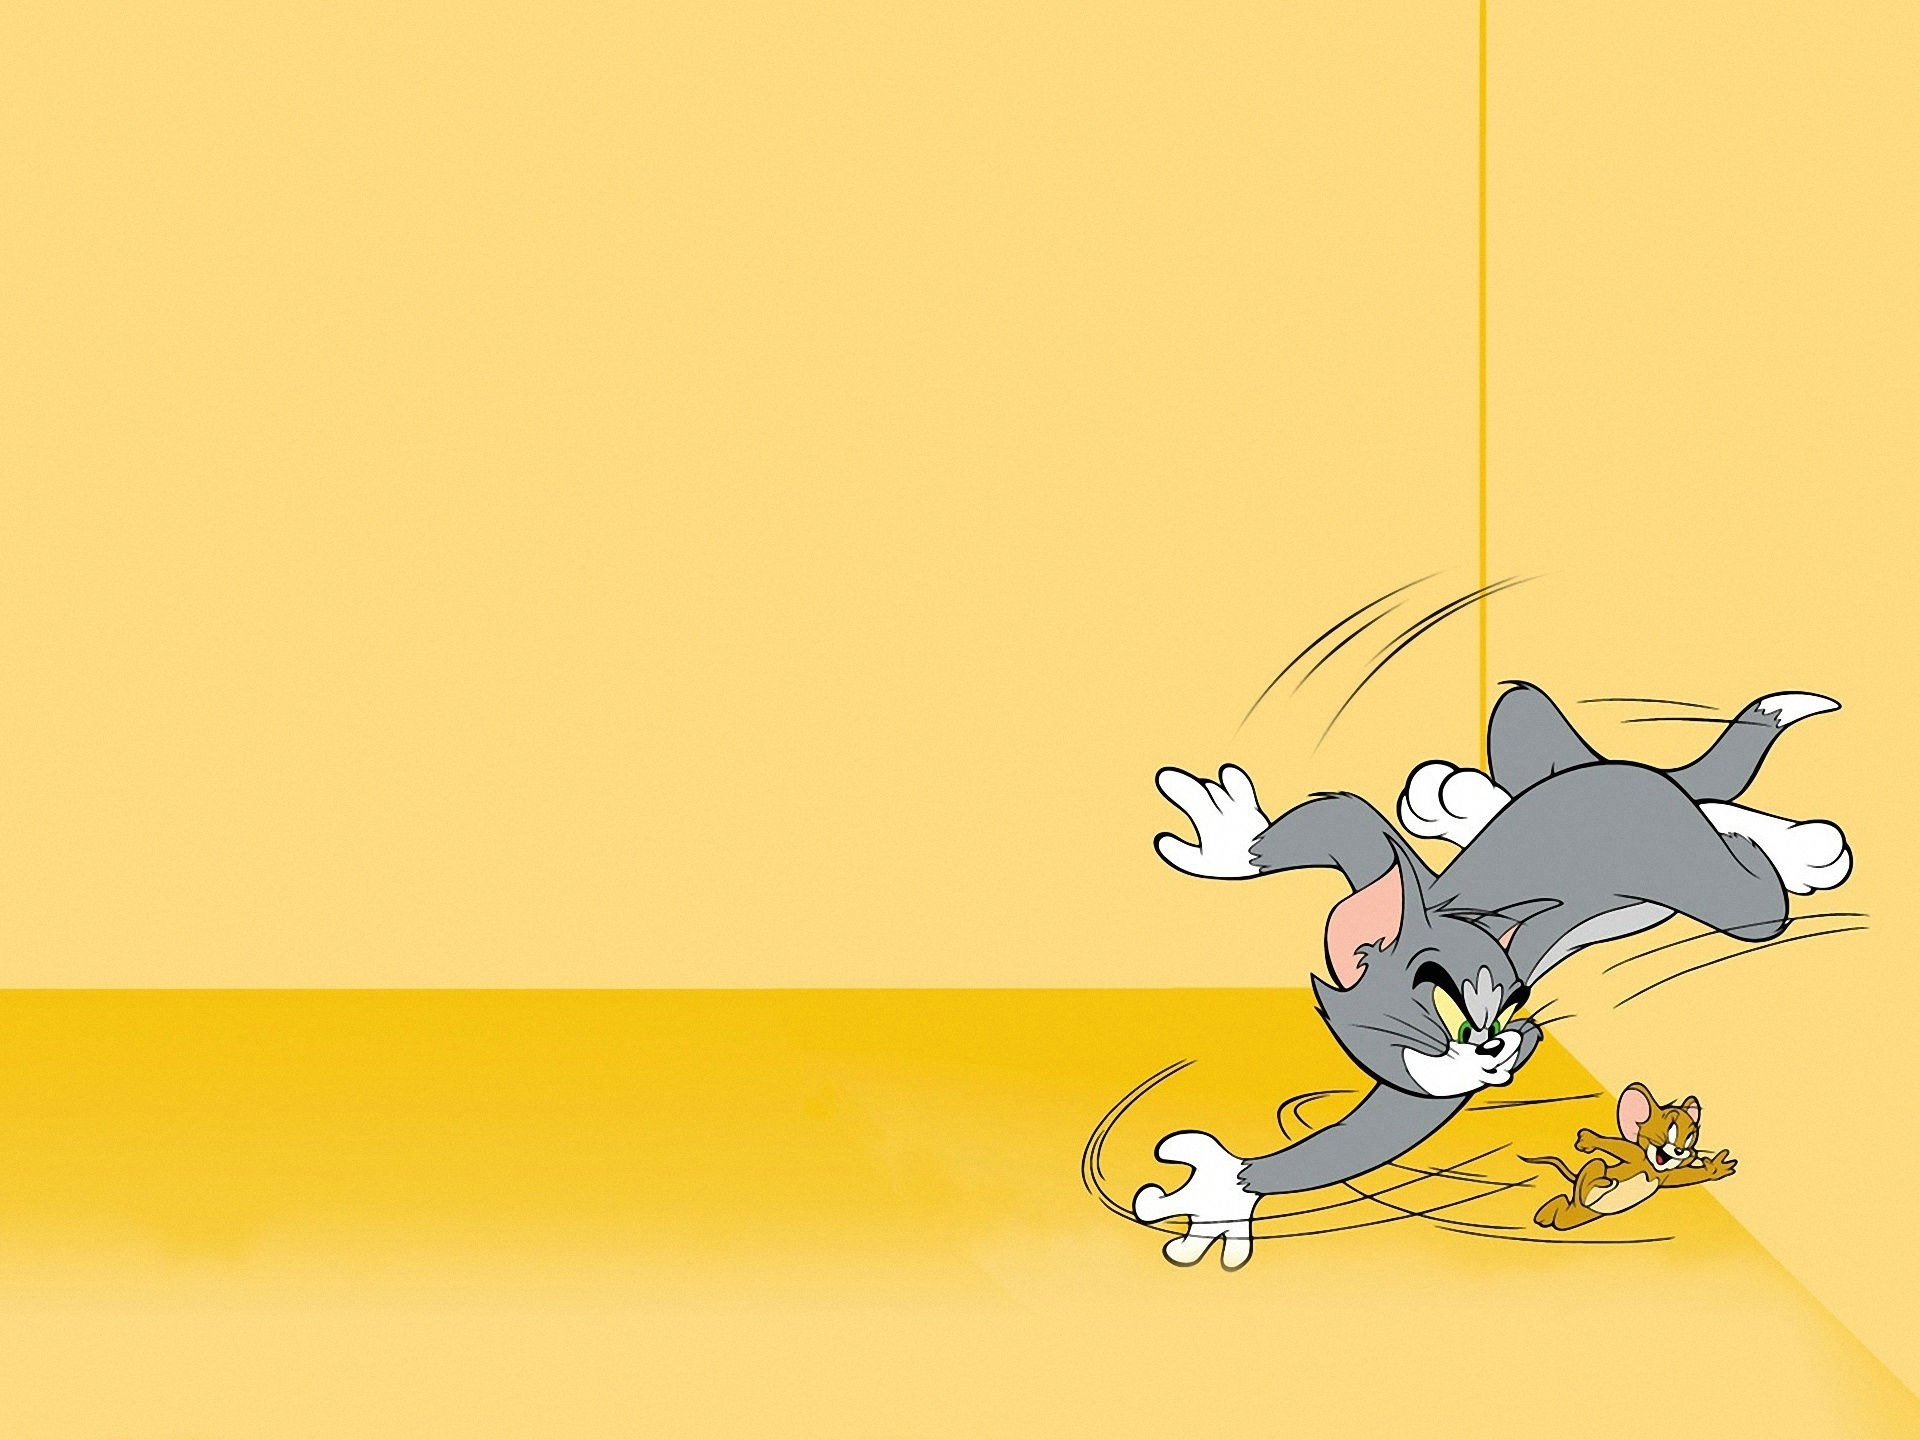 HD wallpaper Tom And Jerry Desktop Hd Wallpaper For Pc Tablet And Mobile  19201080  Wallpaper Flare